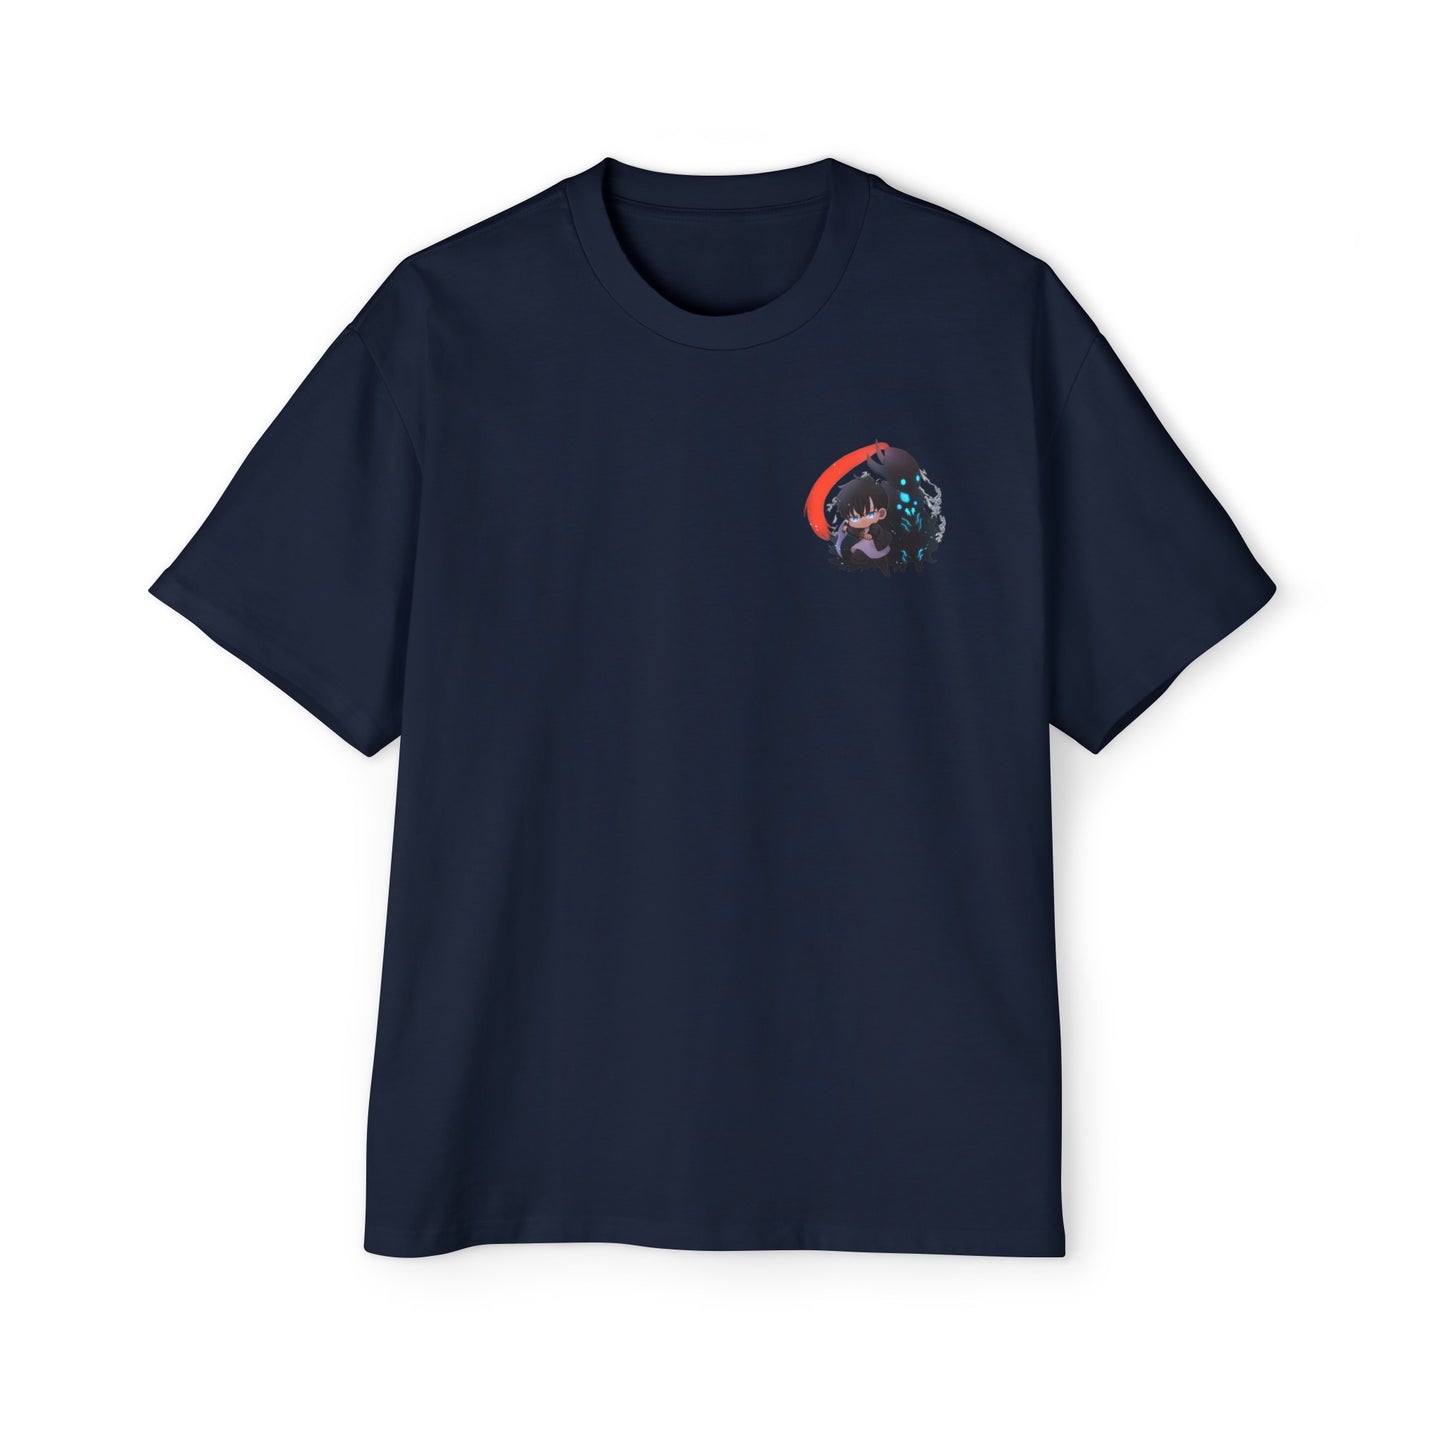 SOLO LEVEING T-SHIRT